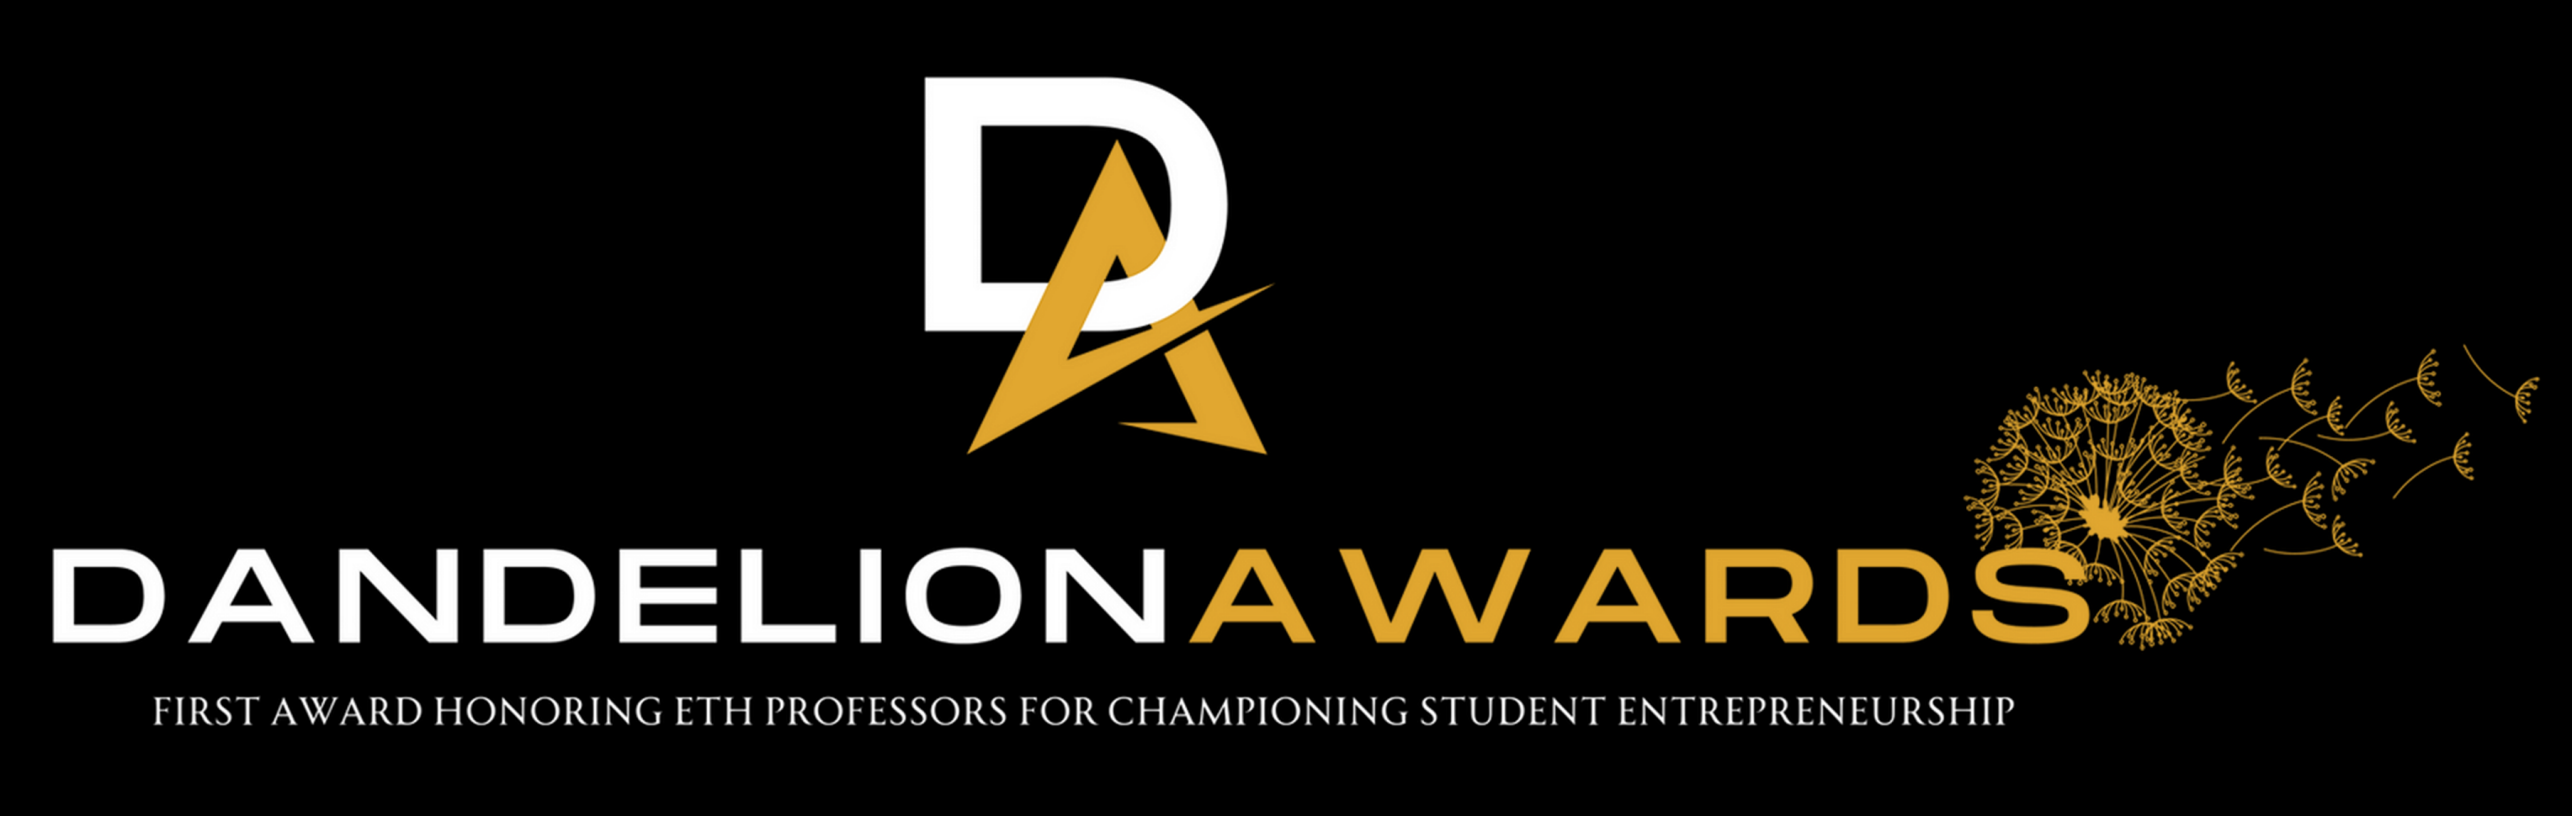 Dandelion-Awards_Logo, linking to further information on the award